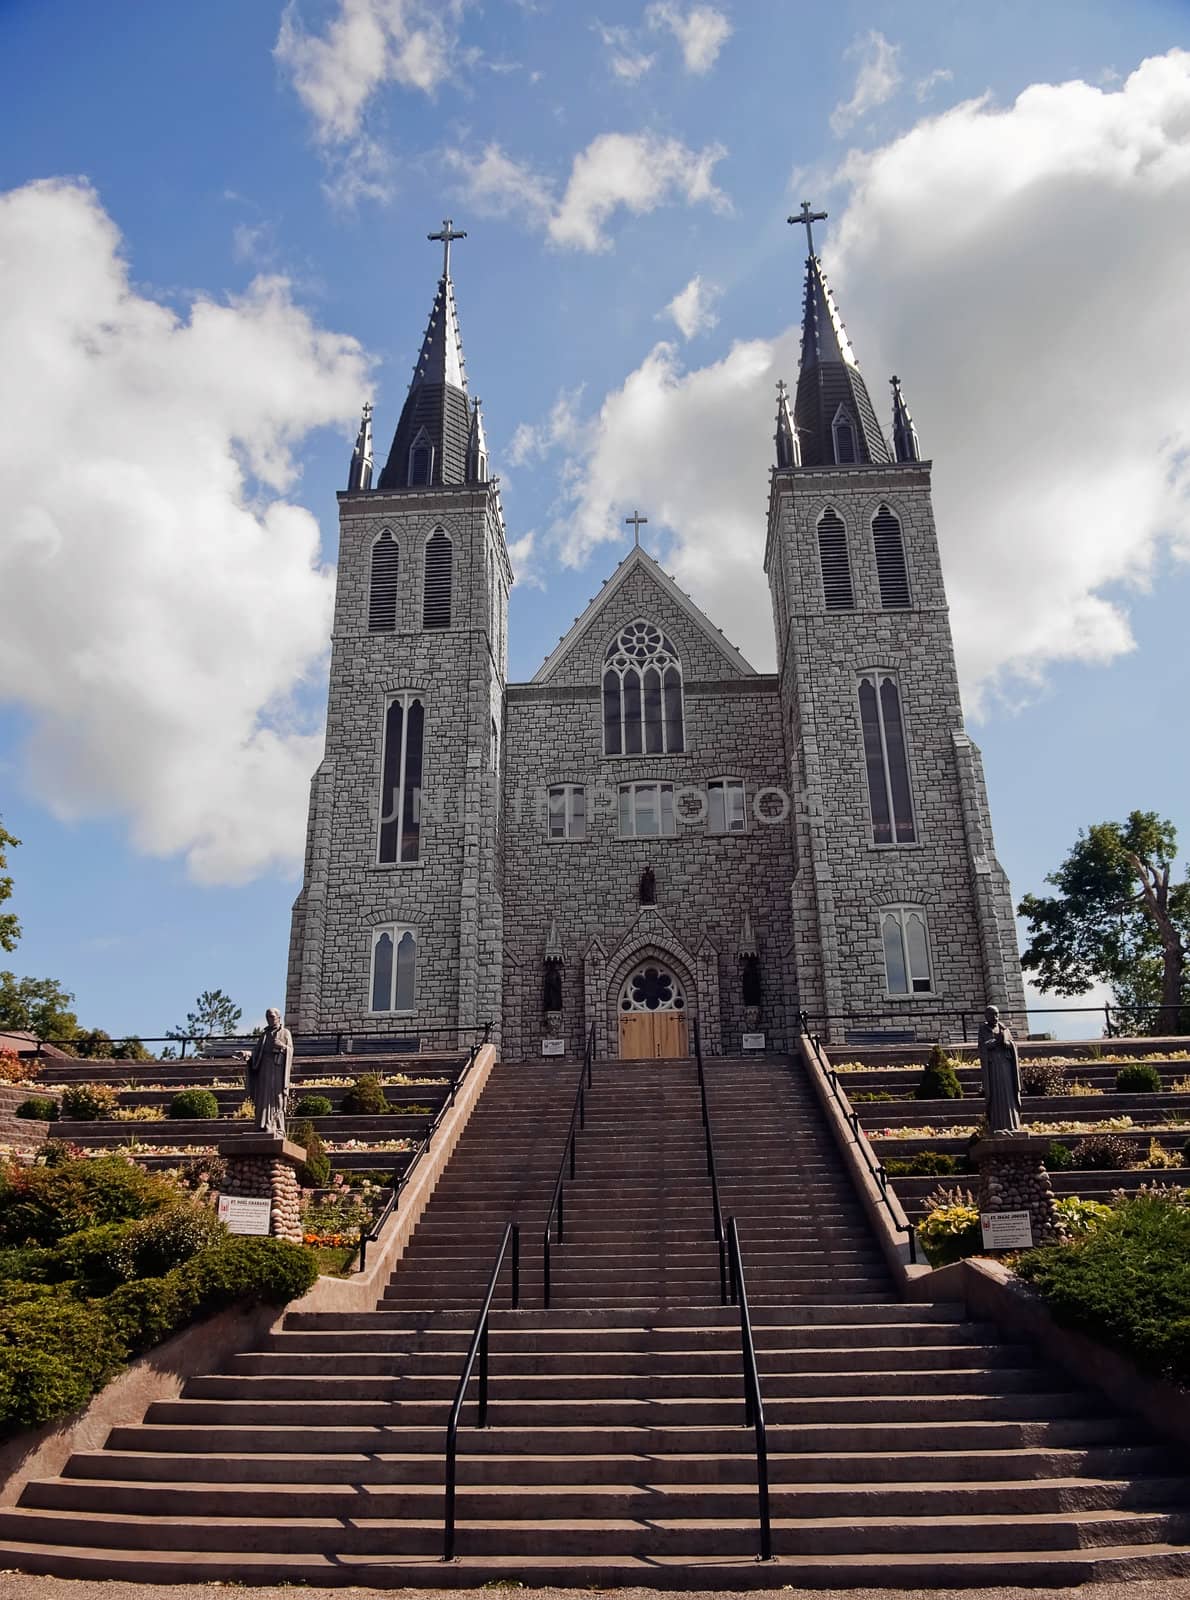 Saint Poul Cathedral in Midland Ontario, pilgrims place